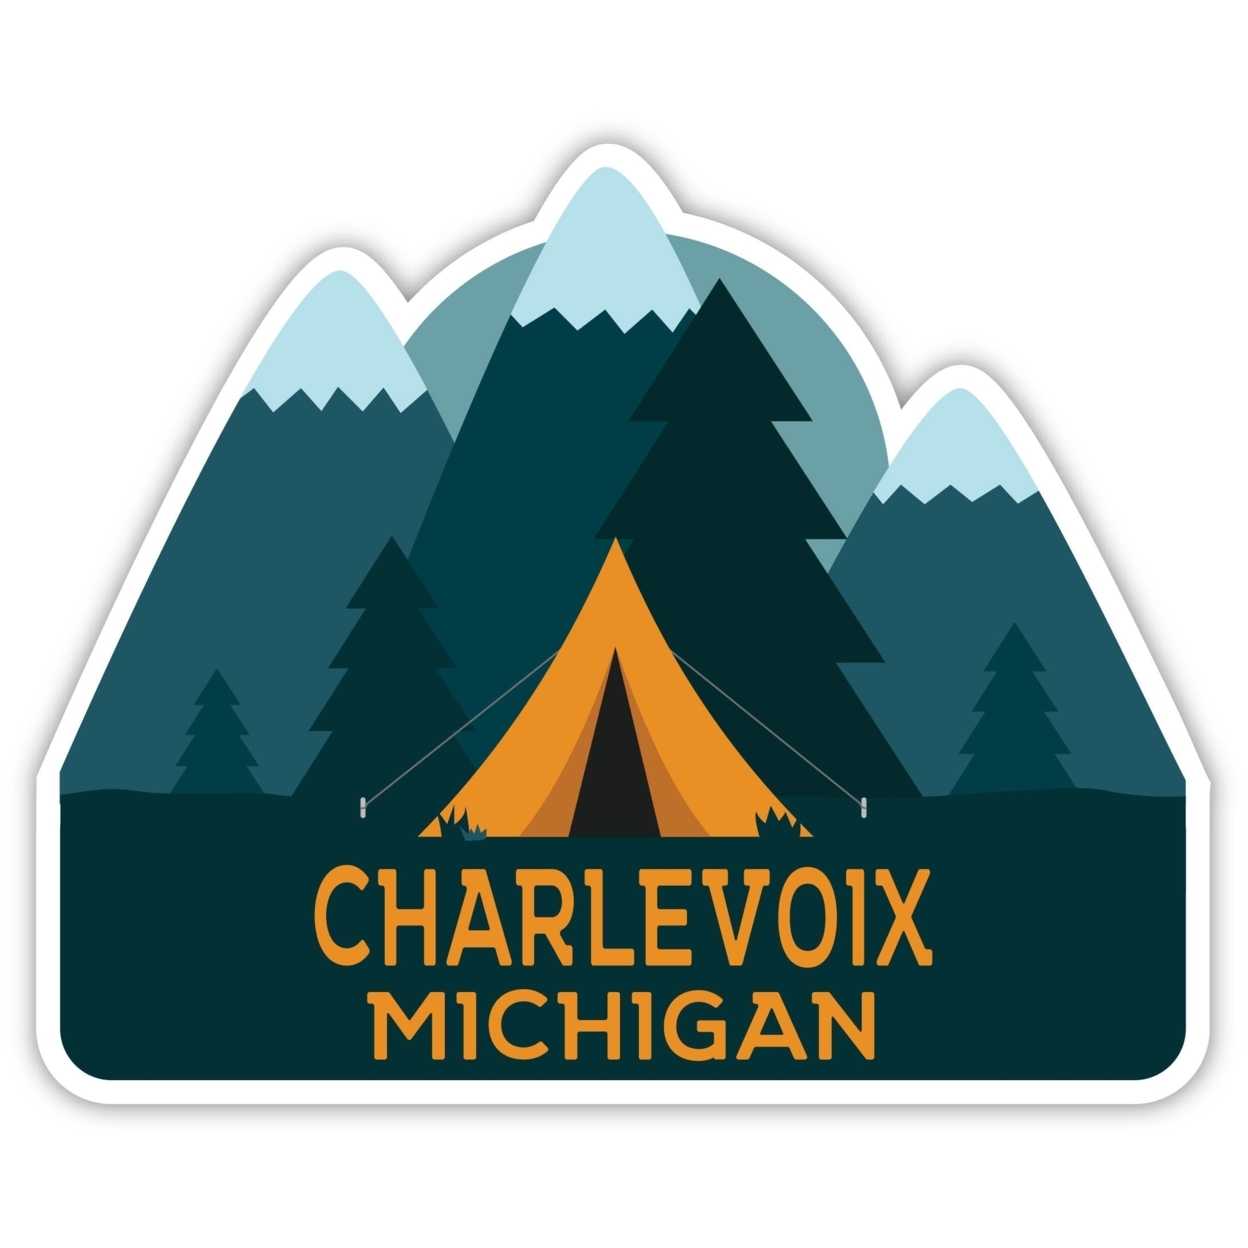 Charlevoix Michigan Souvenir Decorative Stickers (Choose Theme And Size) - 4-Pack, 4-Inch, Tent